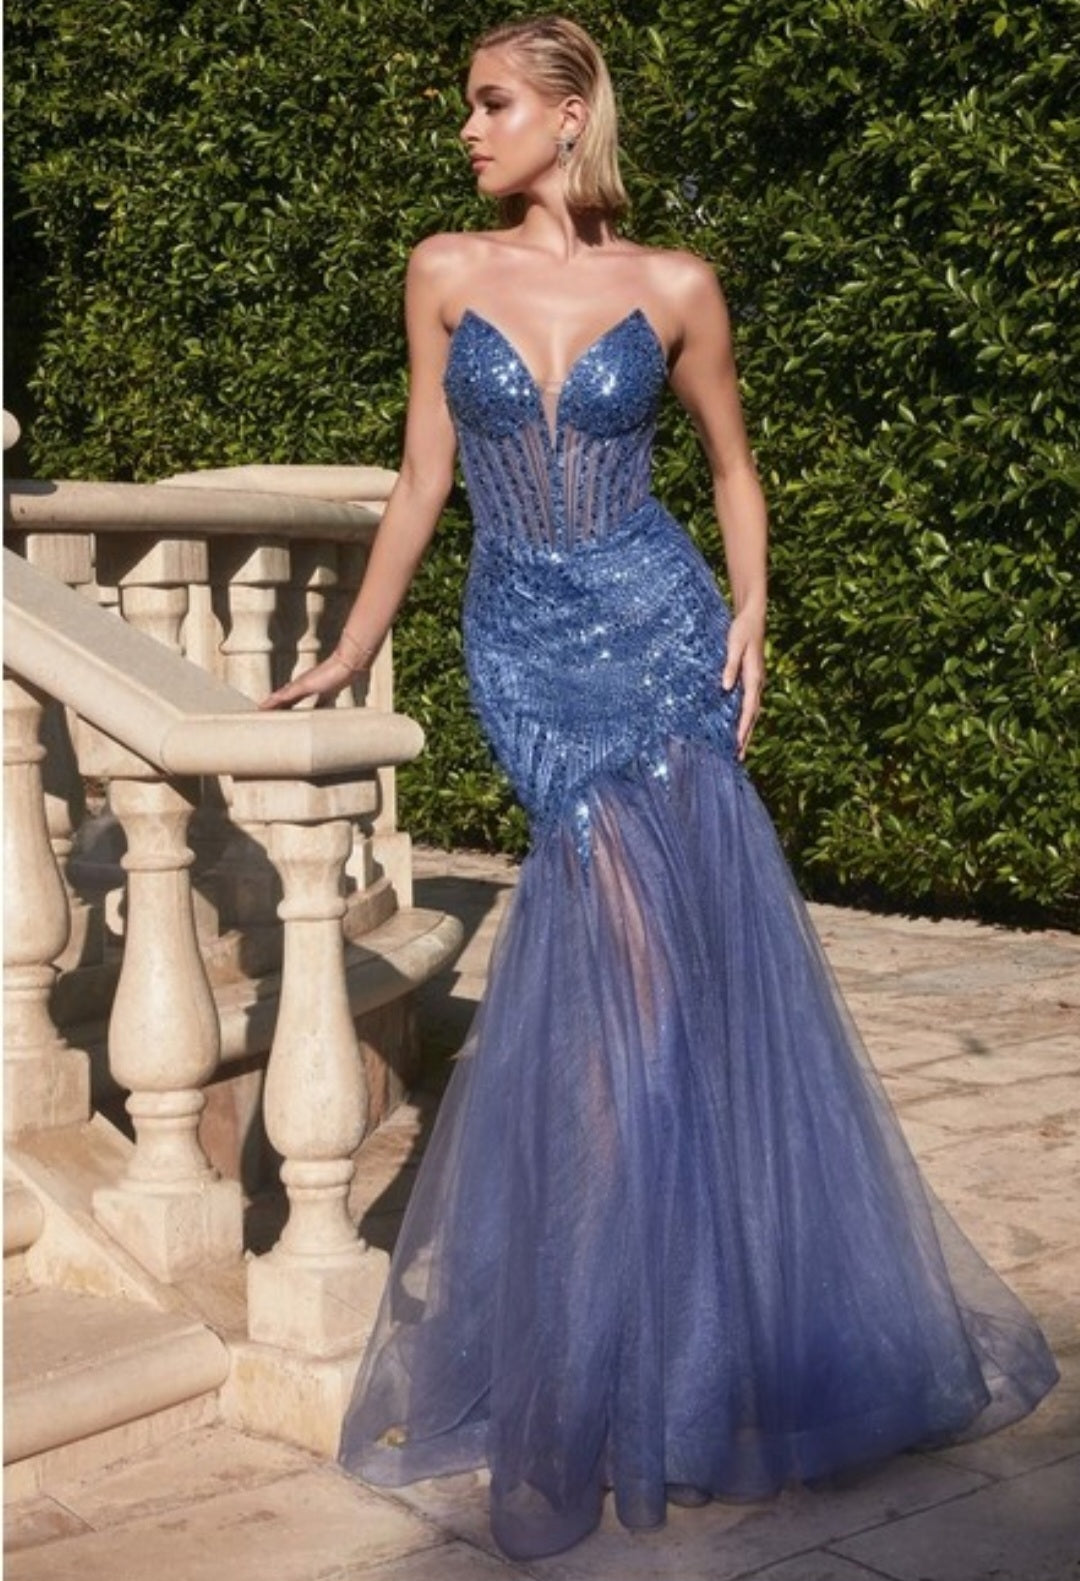 STRAPLESS BEADED MERMAID GOWN